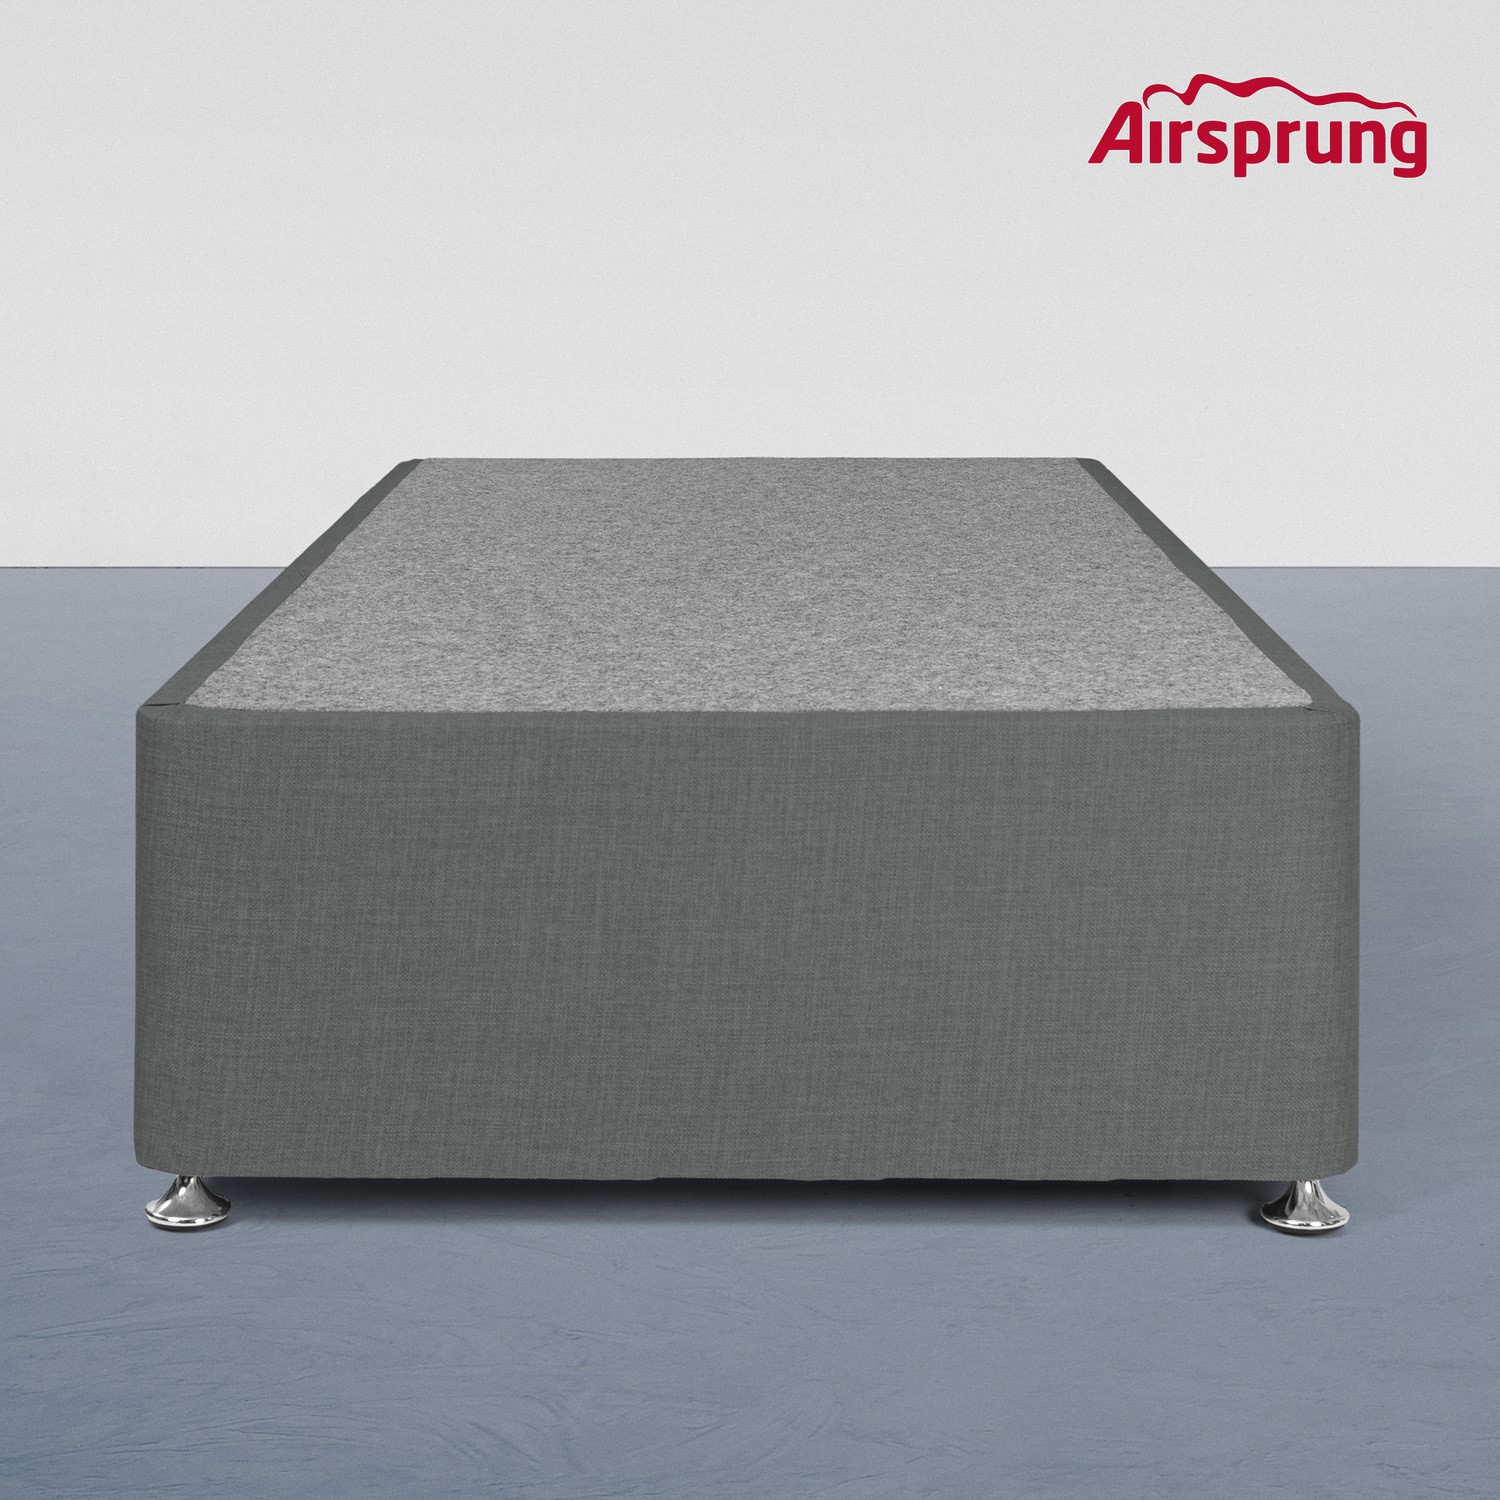 Read more about Airsprung kelston single 2 drawer divan charcoal